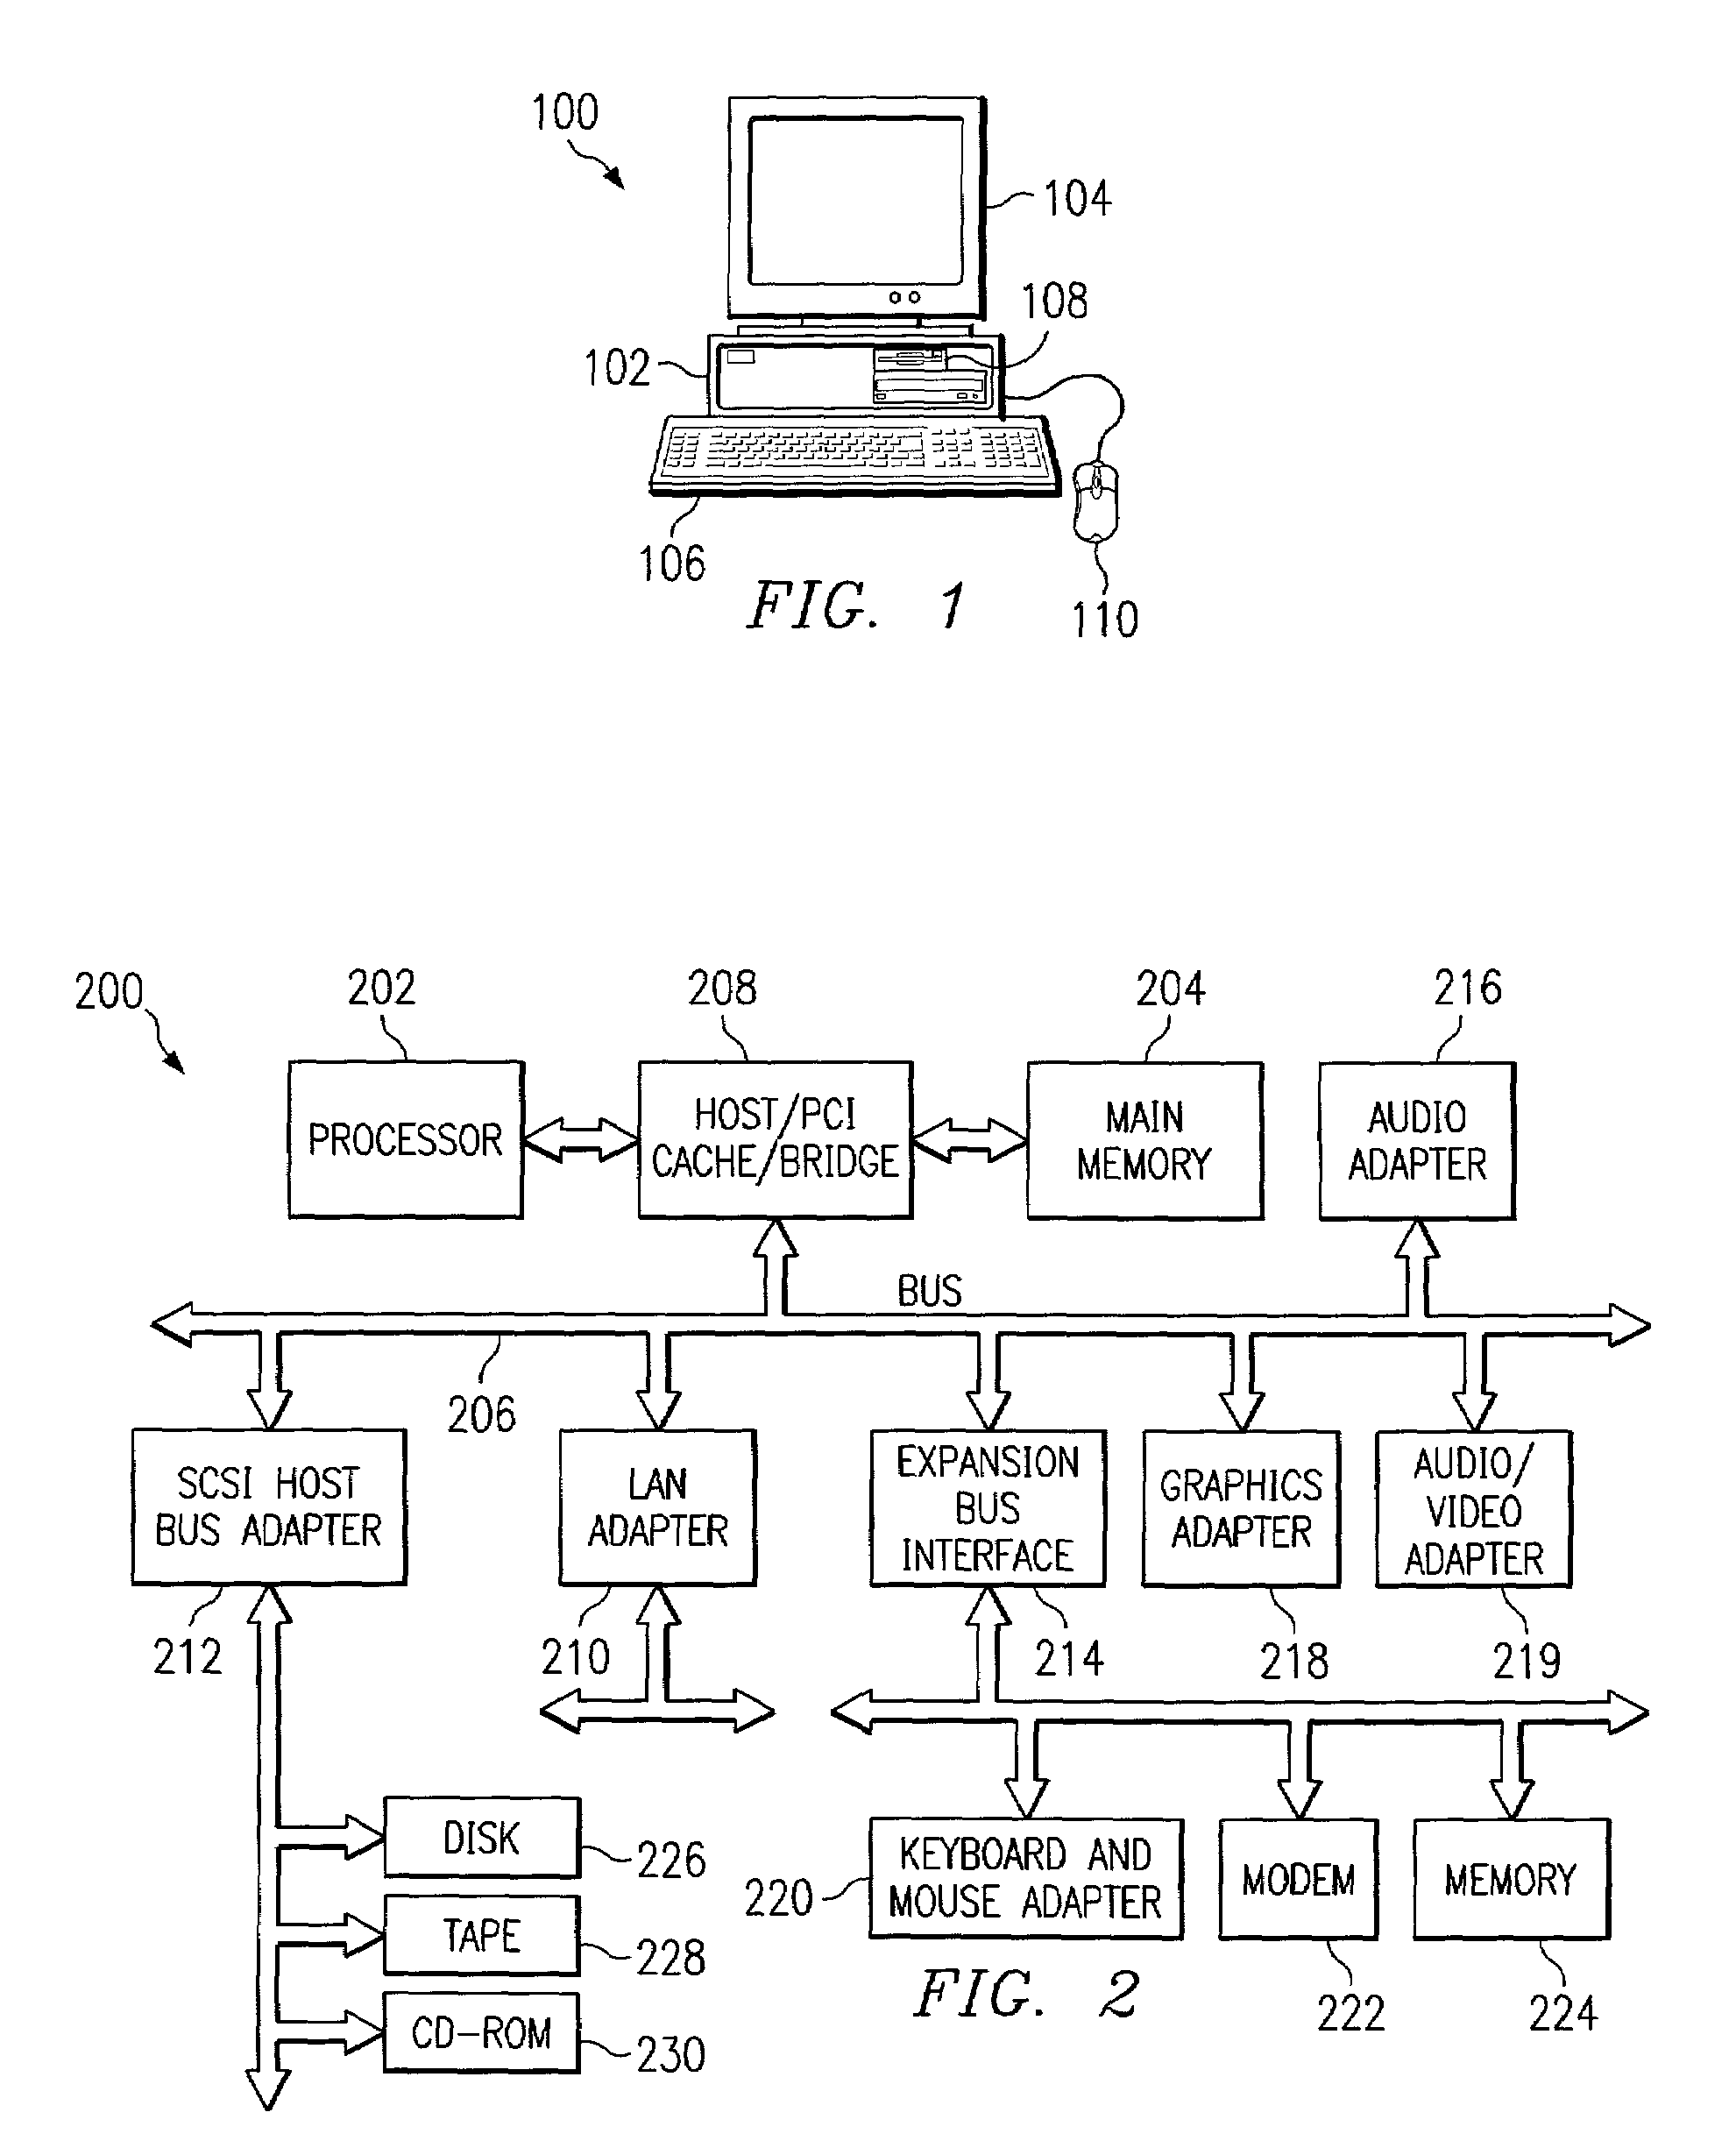 Topological best match naming convention apparatus and method for use in testing graphical user interfaces